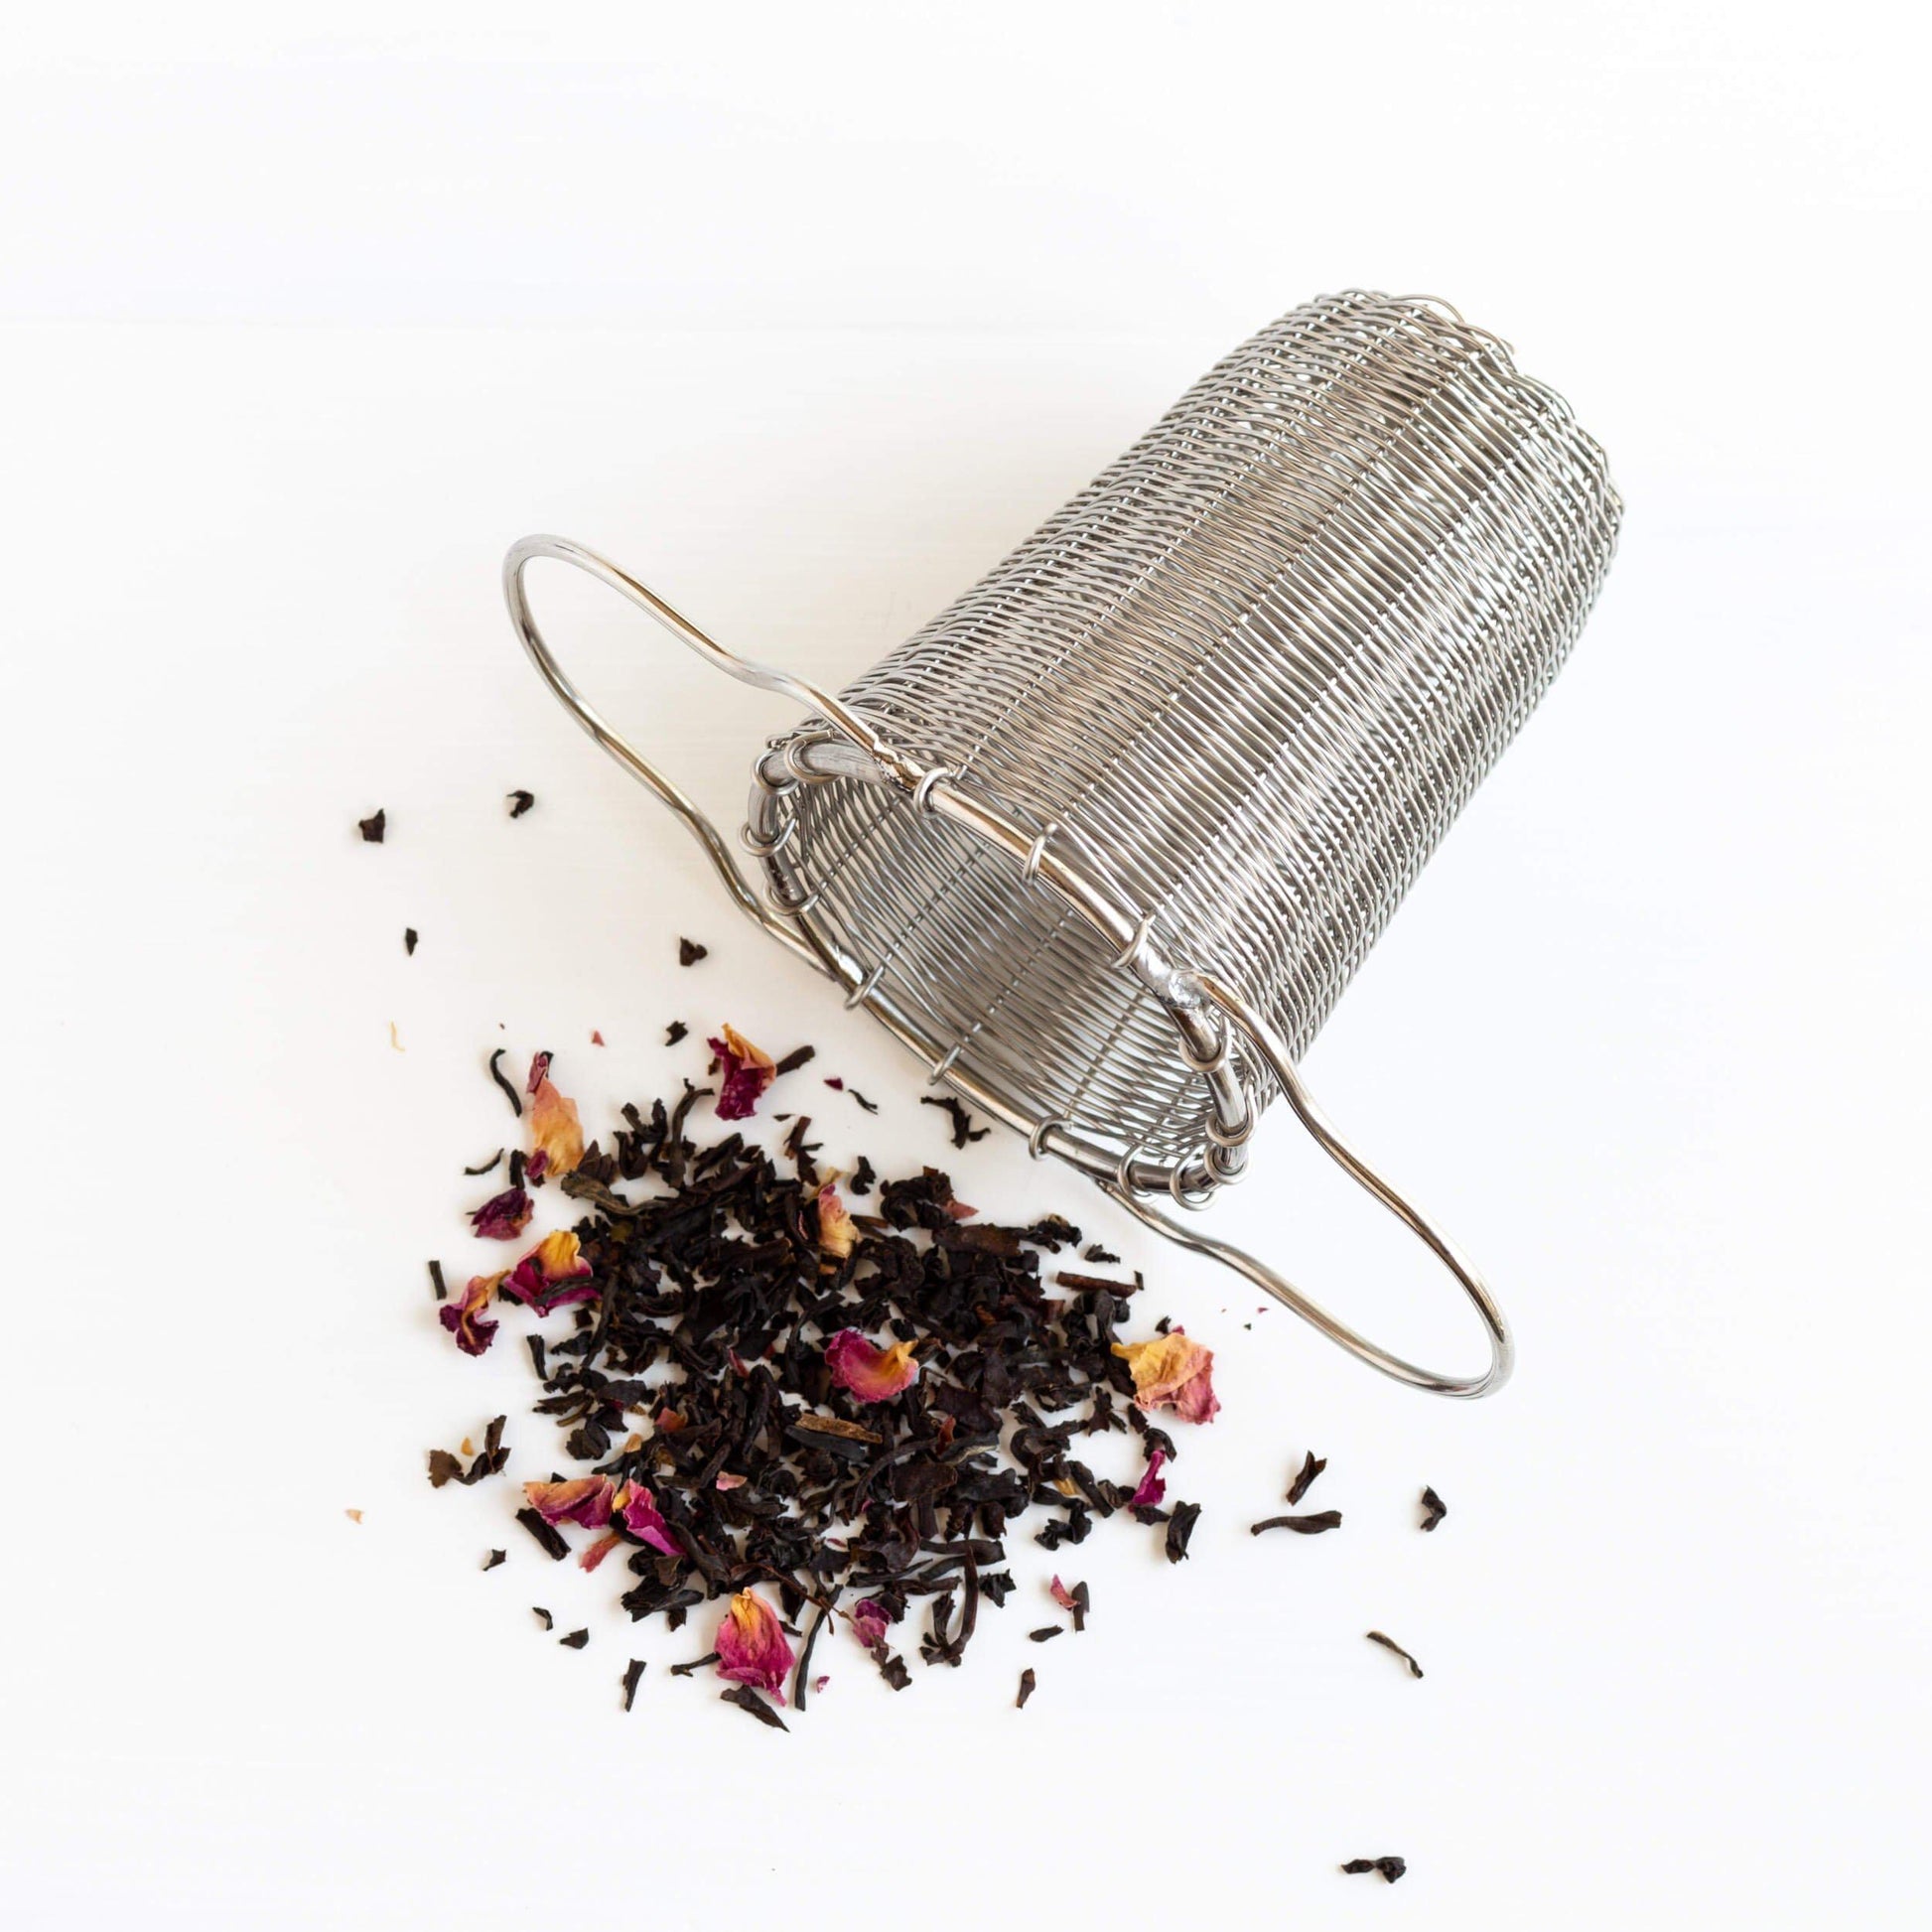 Tea strainer with tea leaves spilling out